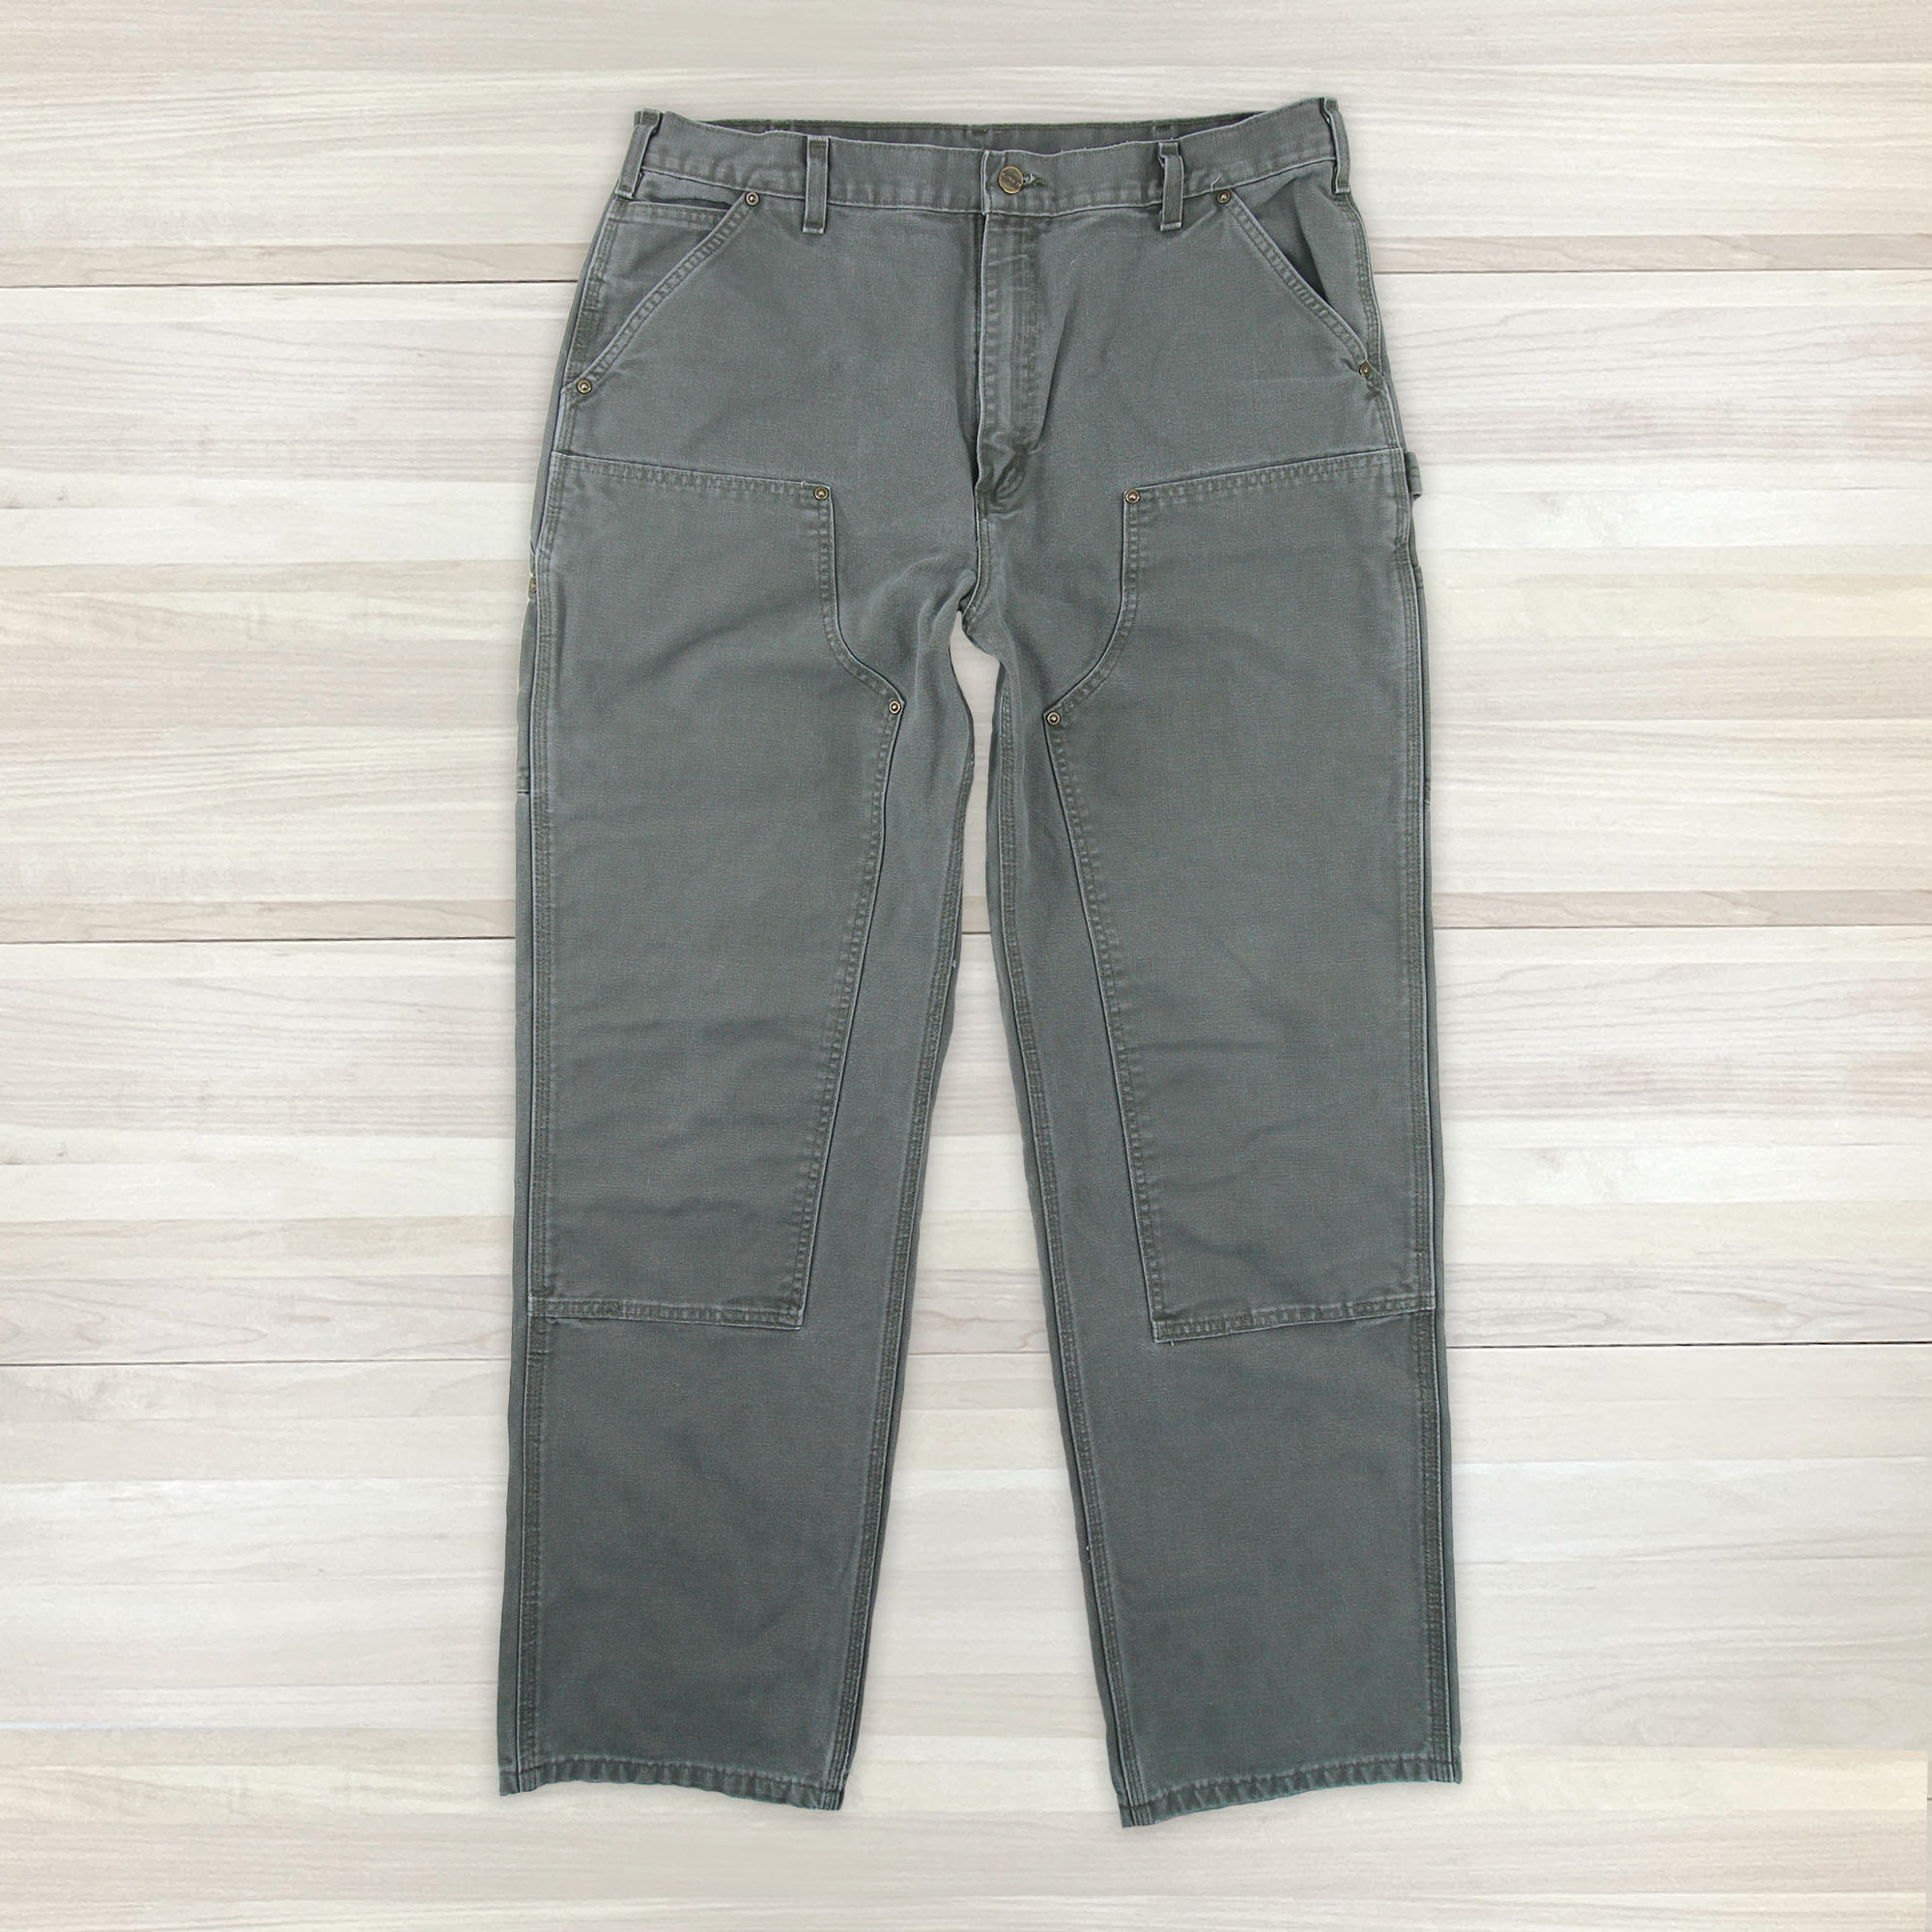 Carhartt B136 MOS Original Dungaree Fit Double Knee Pants - Tagged: 38x34; Measured: 37x 32.5 Great Lakes Reclaimed Denim